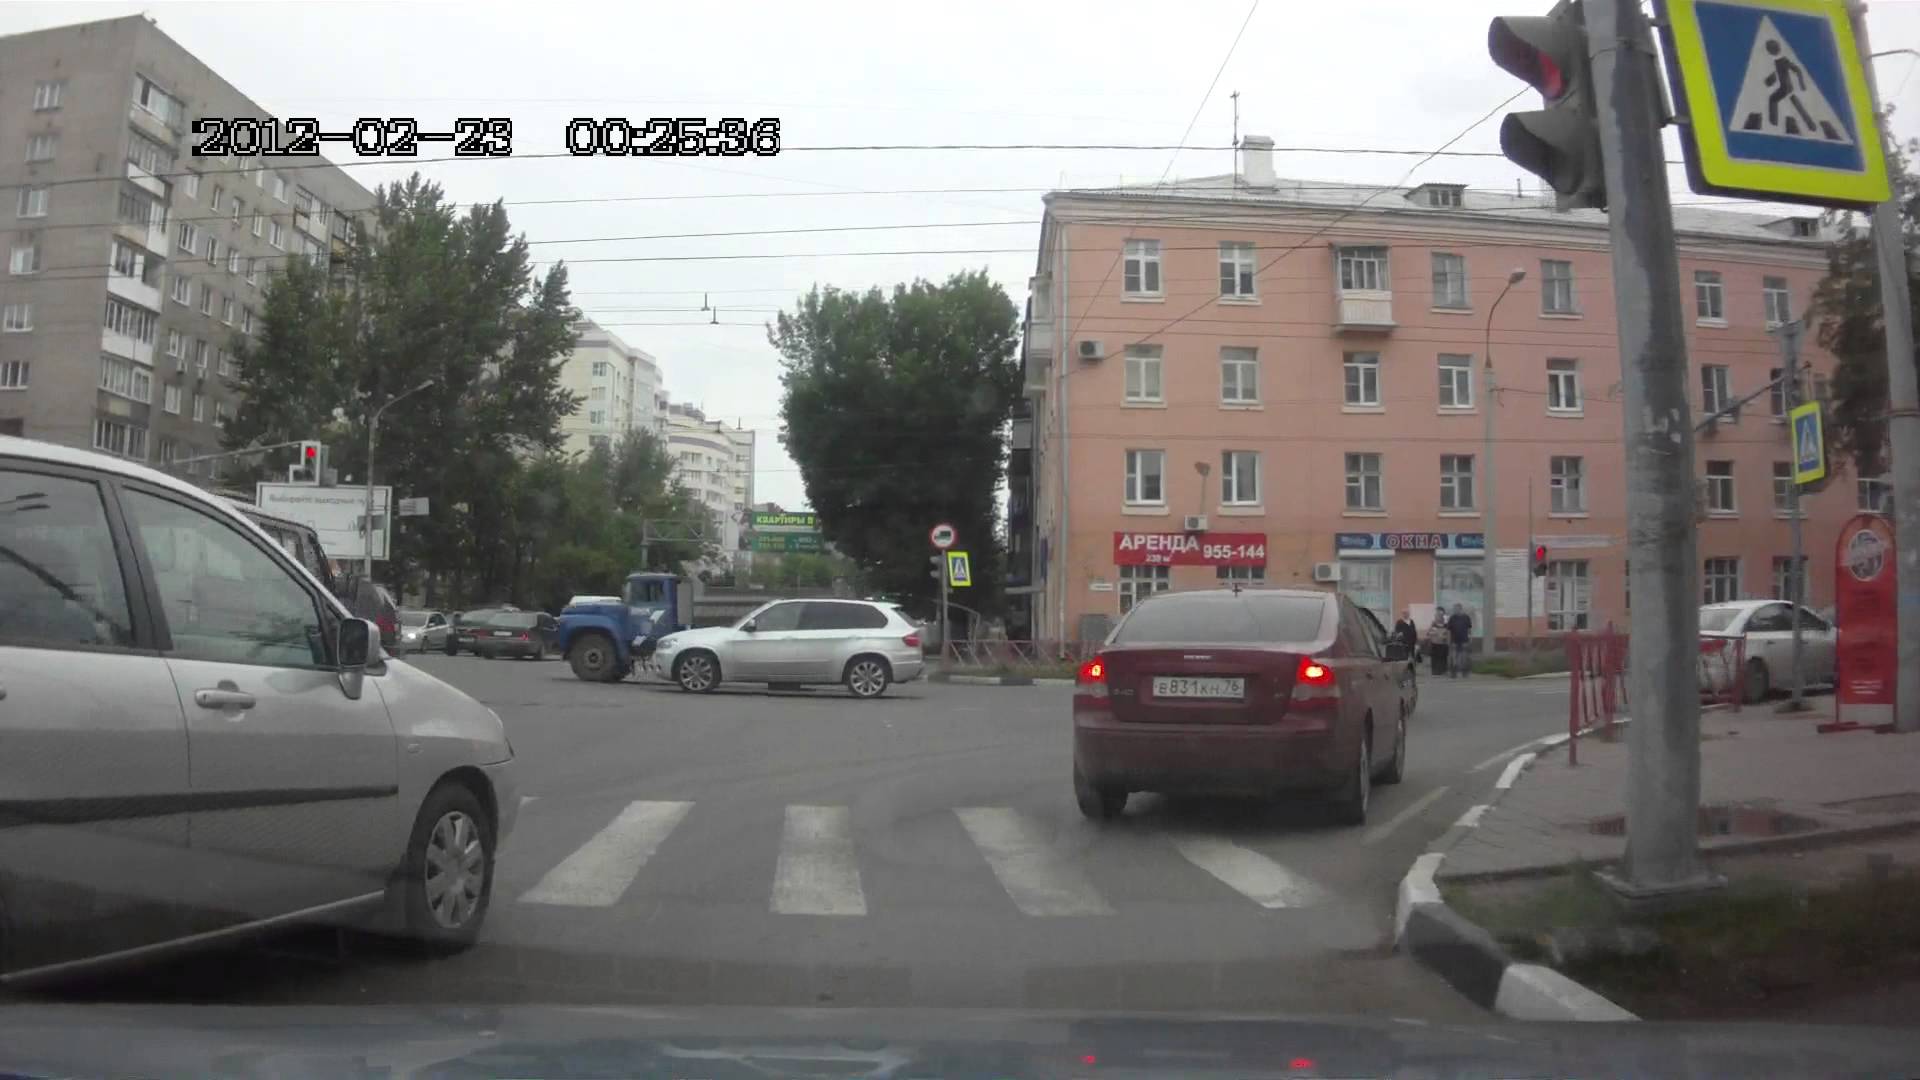 only in russia 3 accidents in 30